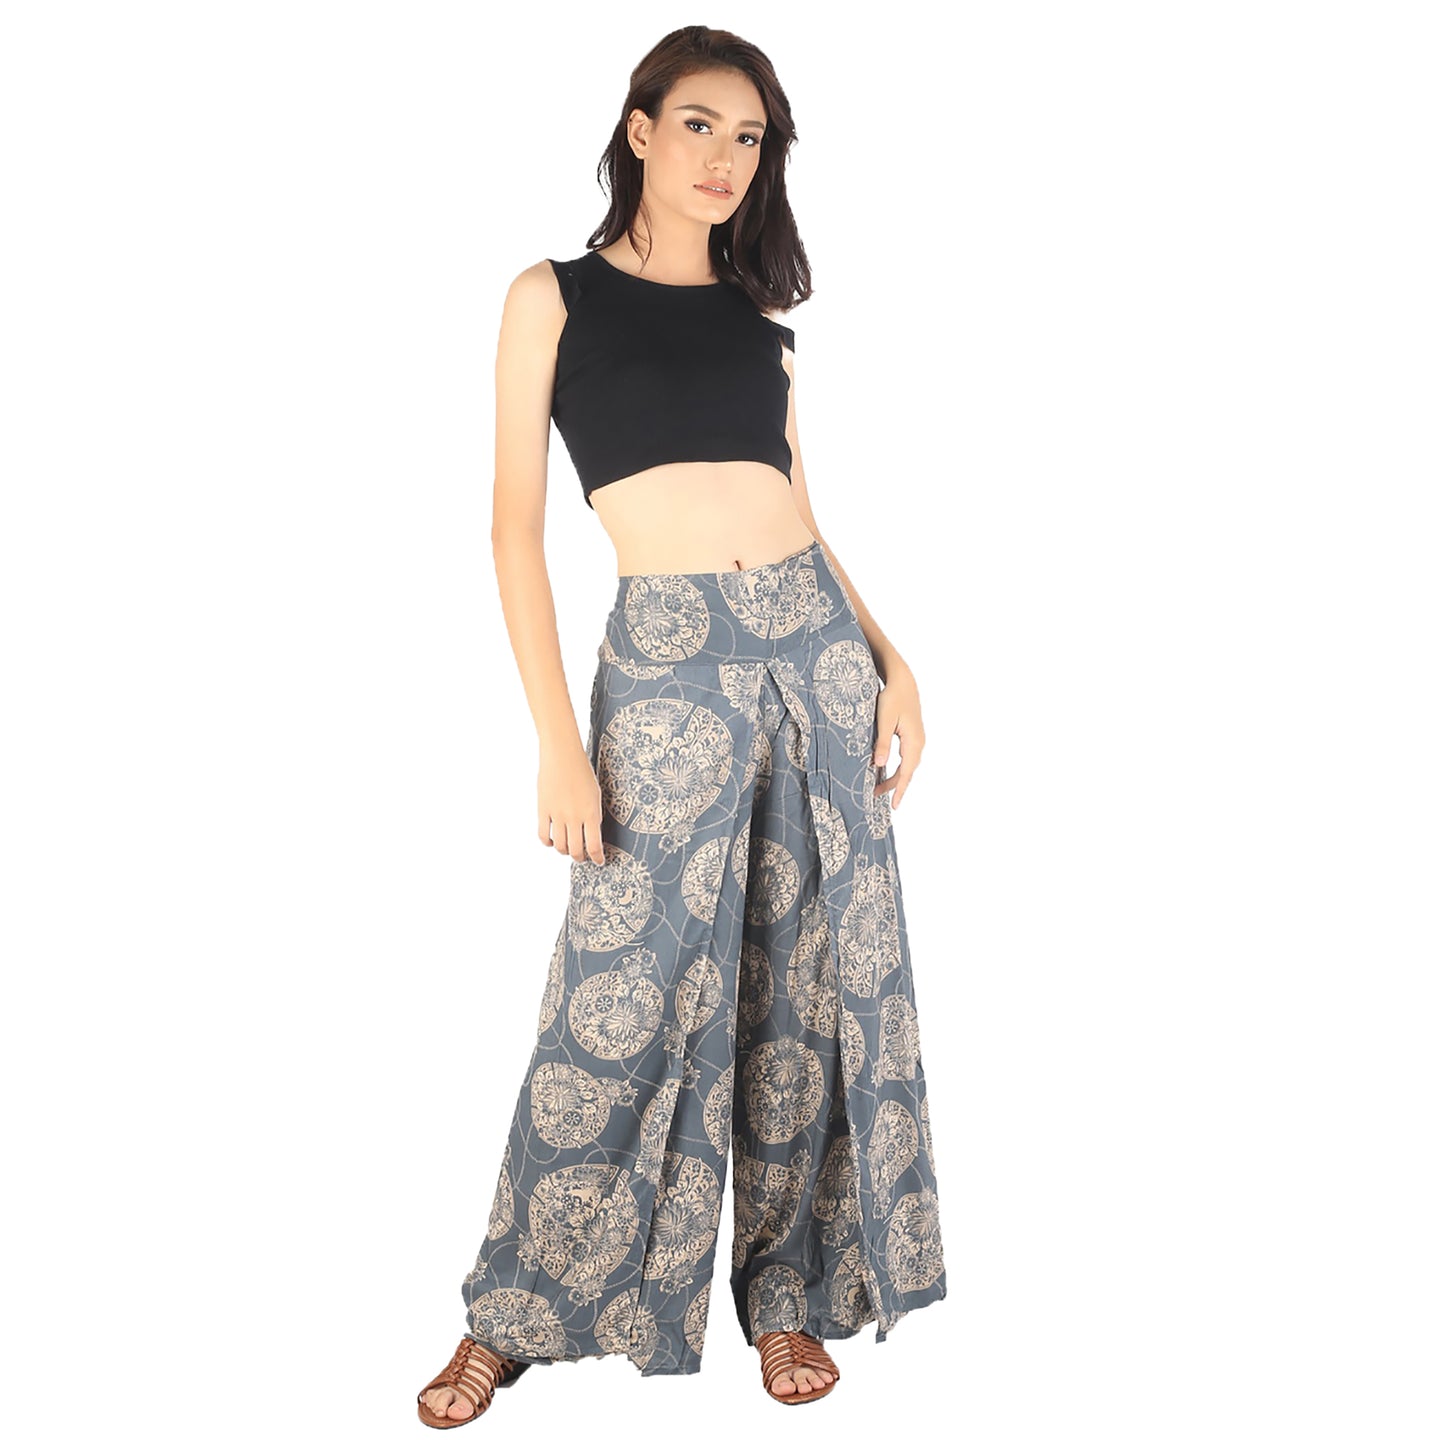 Floral Classic Women Palazzo pants in Gray PP0076 020098 06